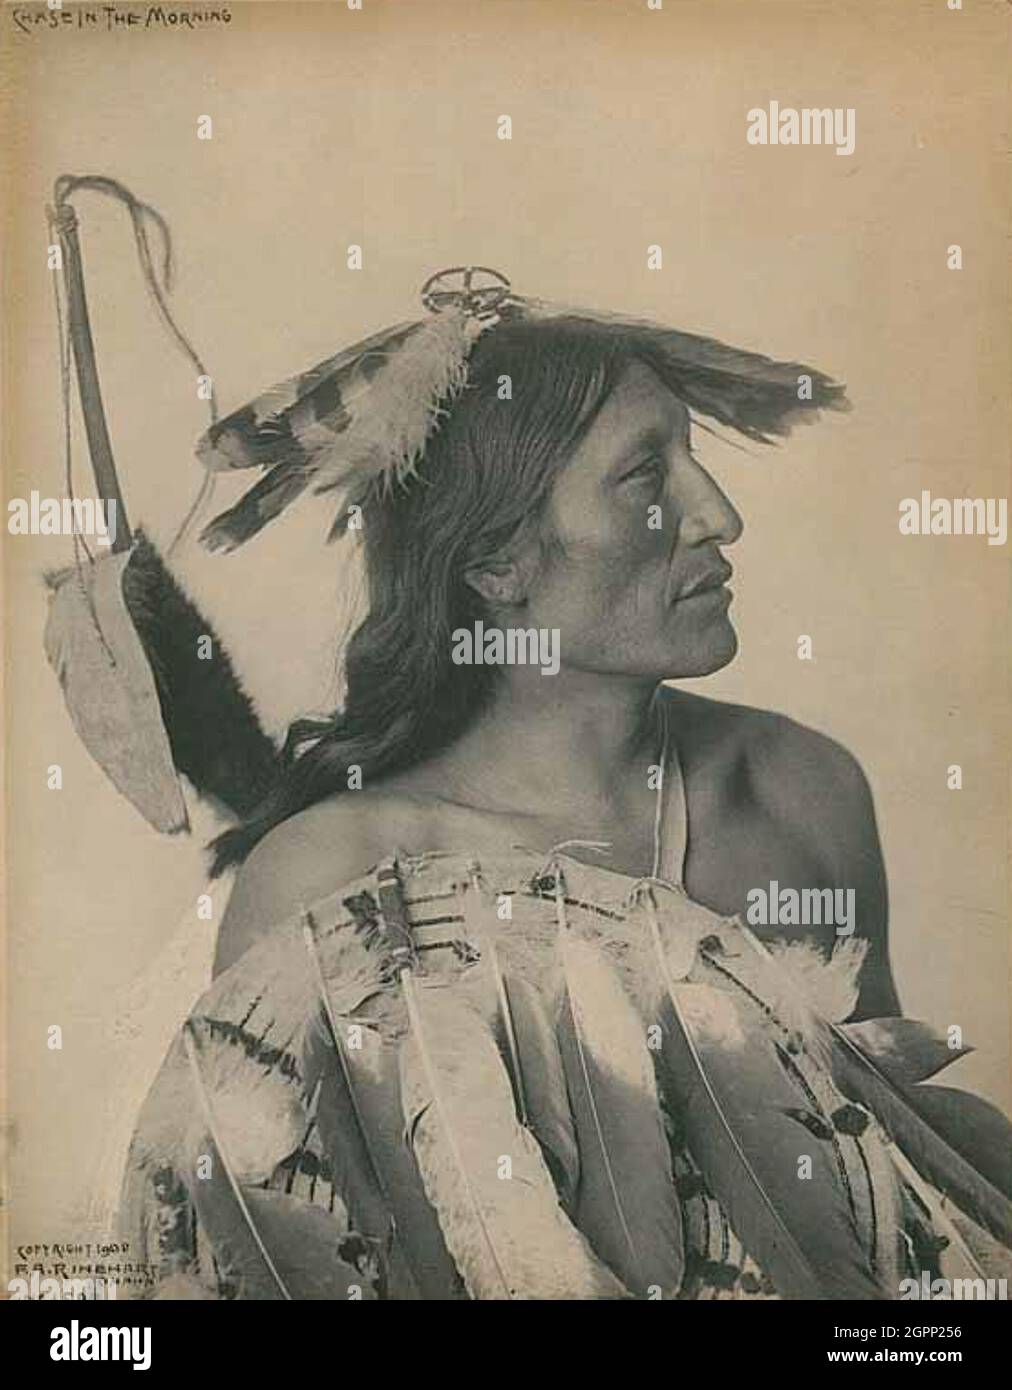 Chase-in-the-Morning, c. 1888. [Portrait of Anapao Wa-Ku-Wa (Chase in the Morning), an Oglala Lakota man, younger brother of Black Whiteman who was killed during the Battle of the Little Bighorn]. Platinum print. Stock Photo